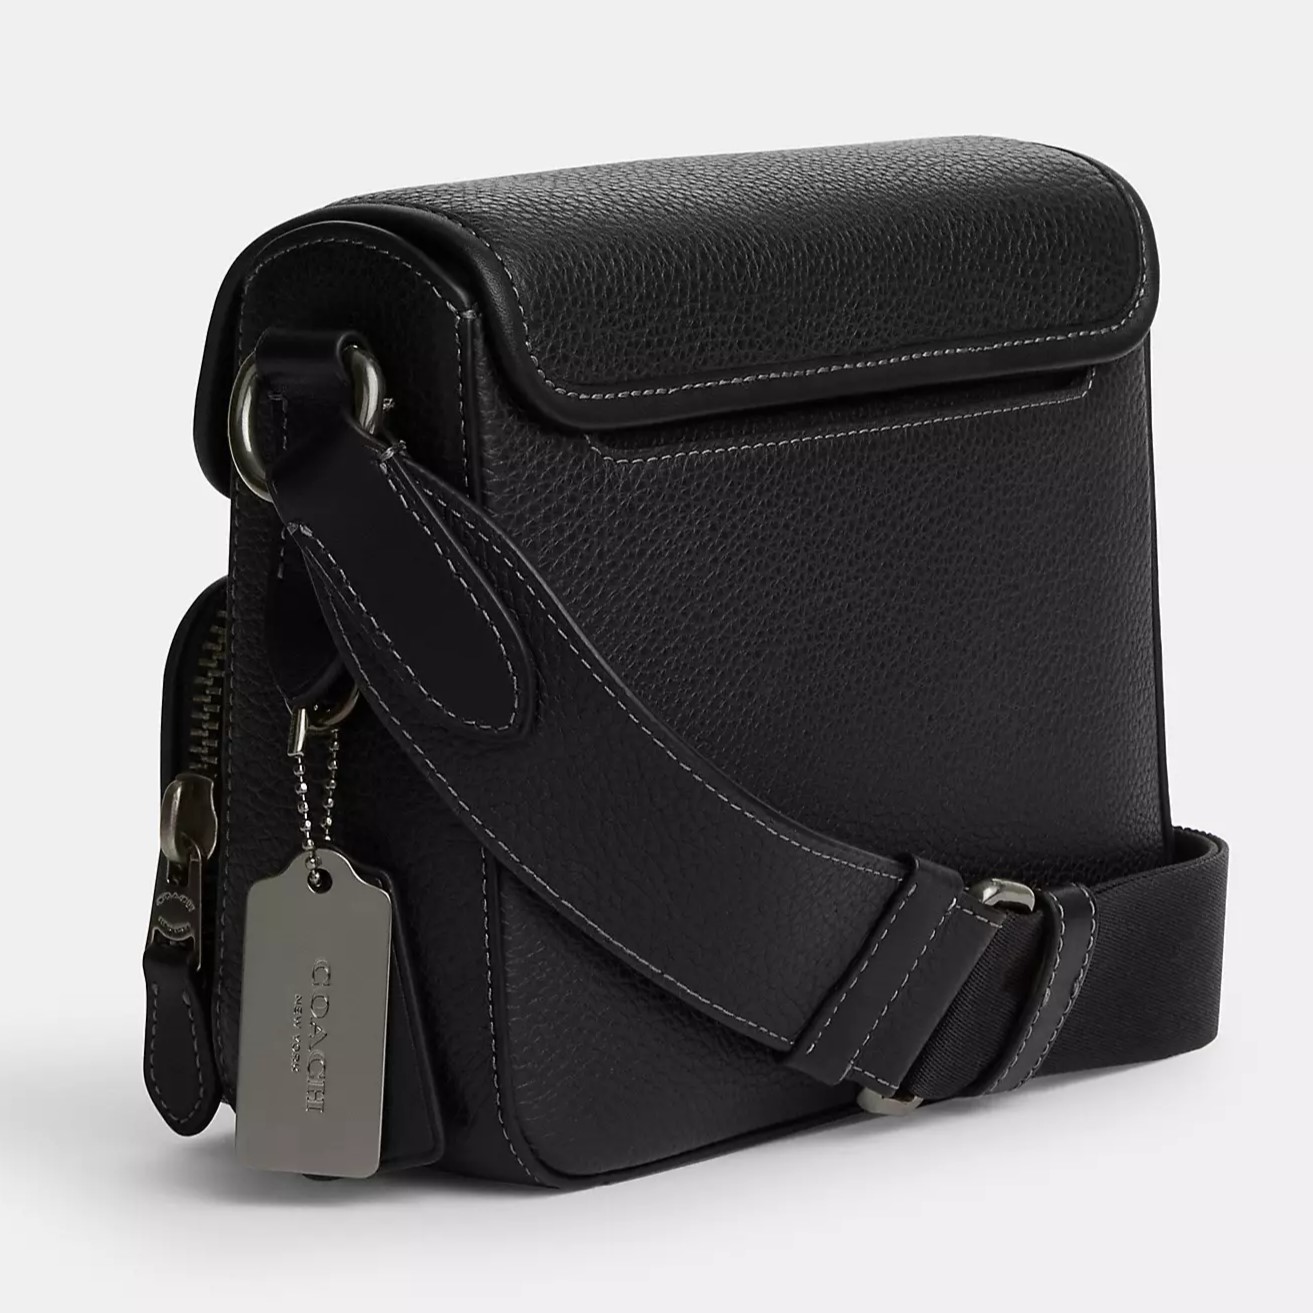 TÚI COACH NAM SULLIVAN FLAP CROSSBODY IN BLACK REFINED PEBBLE LEATHER AND SMOOTH CALF LEATHER CN729 1